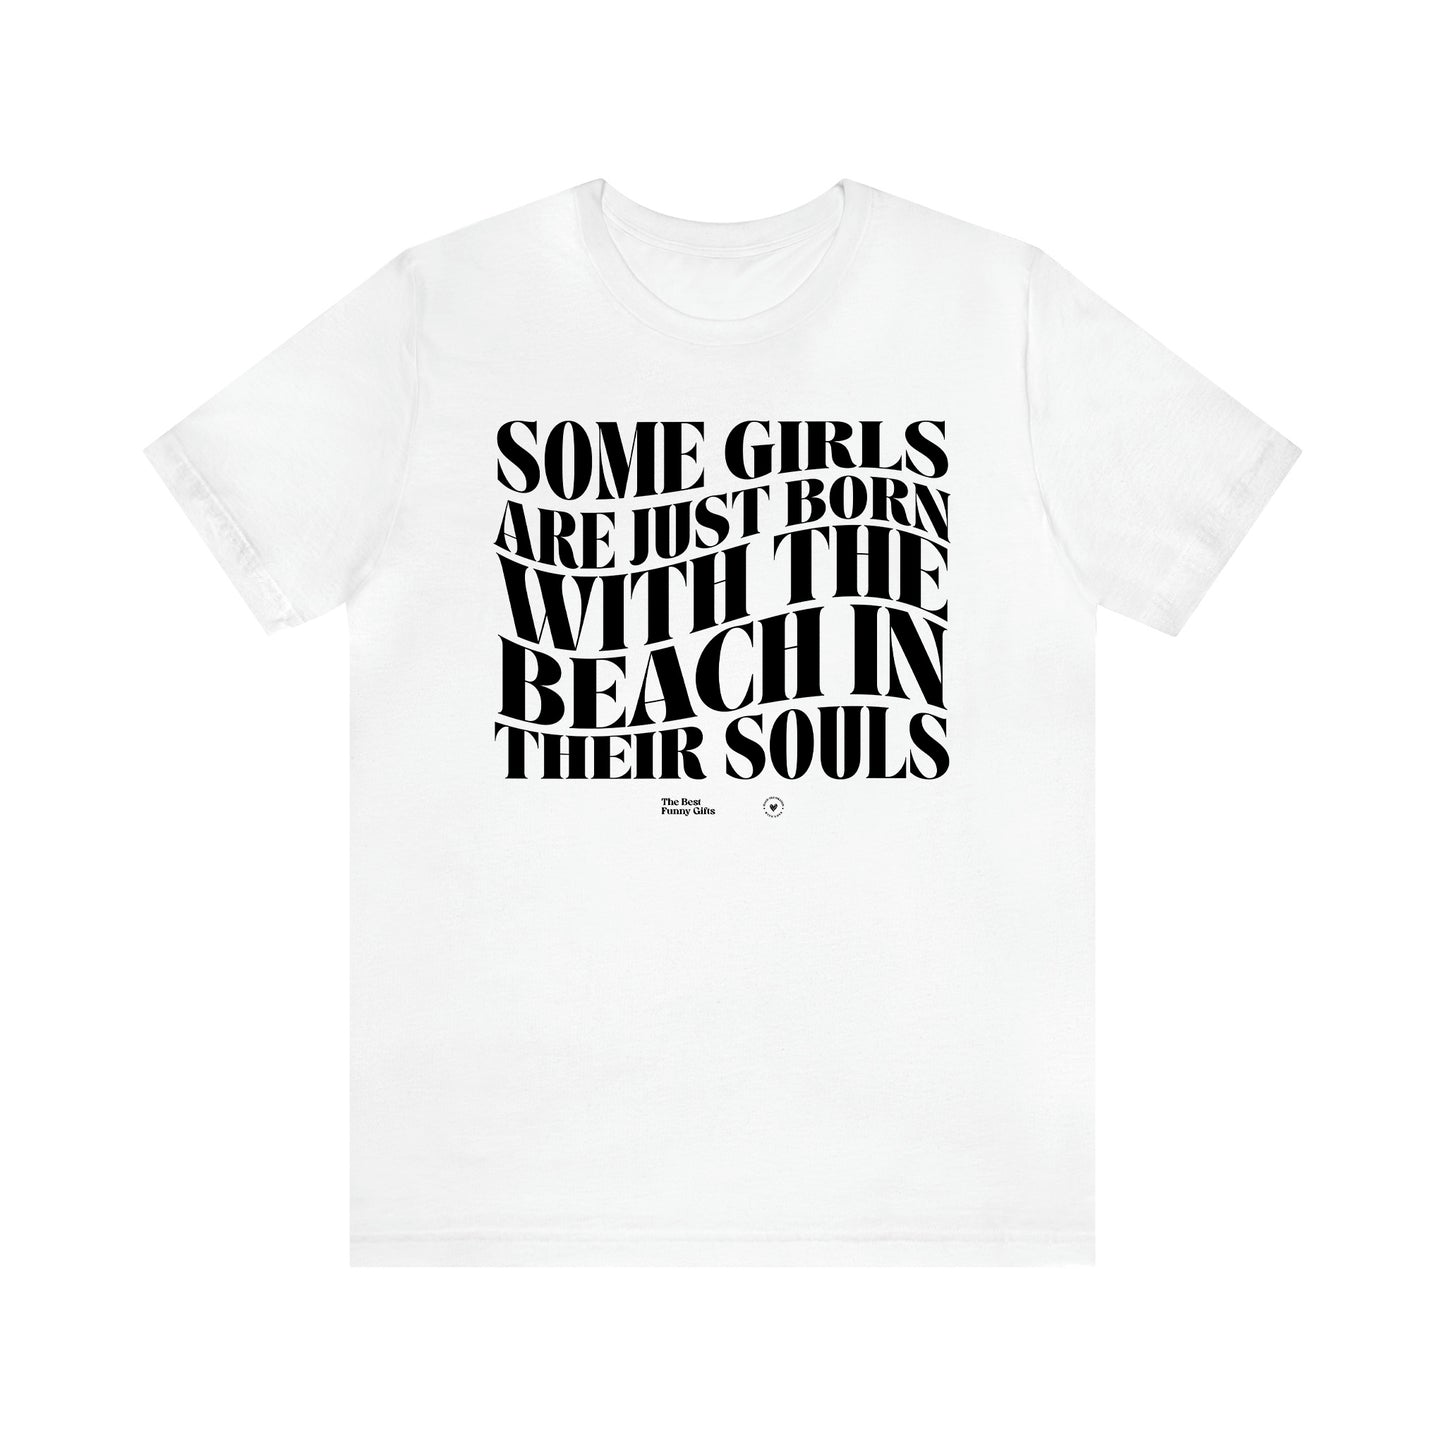 Women's T Shirts Some Girls Are Just Born With the Beach in Their Souls - The Best Funny Gifts